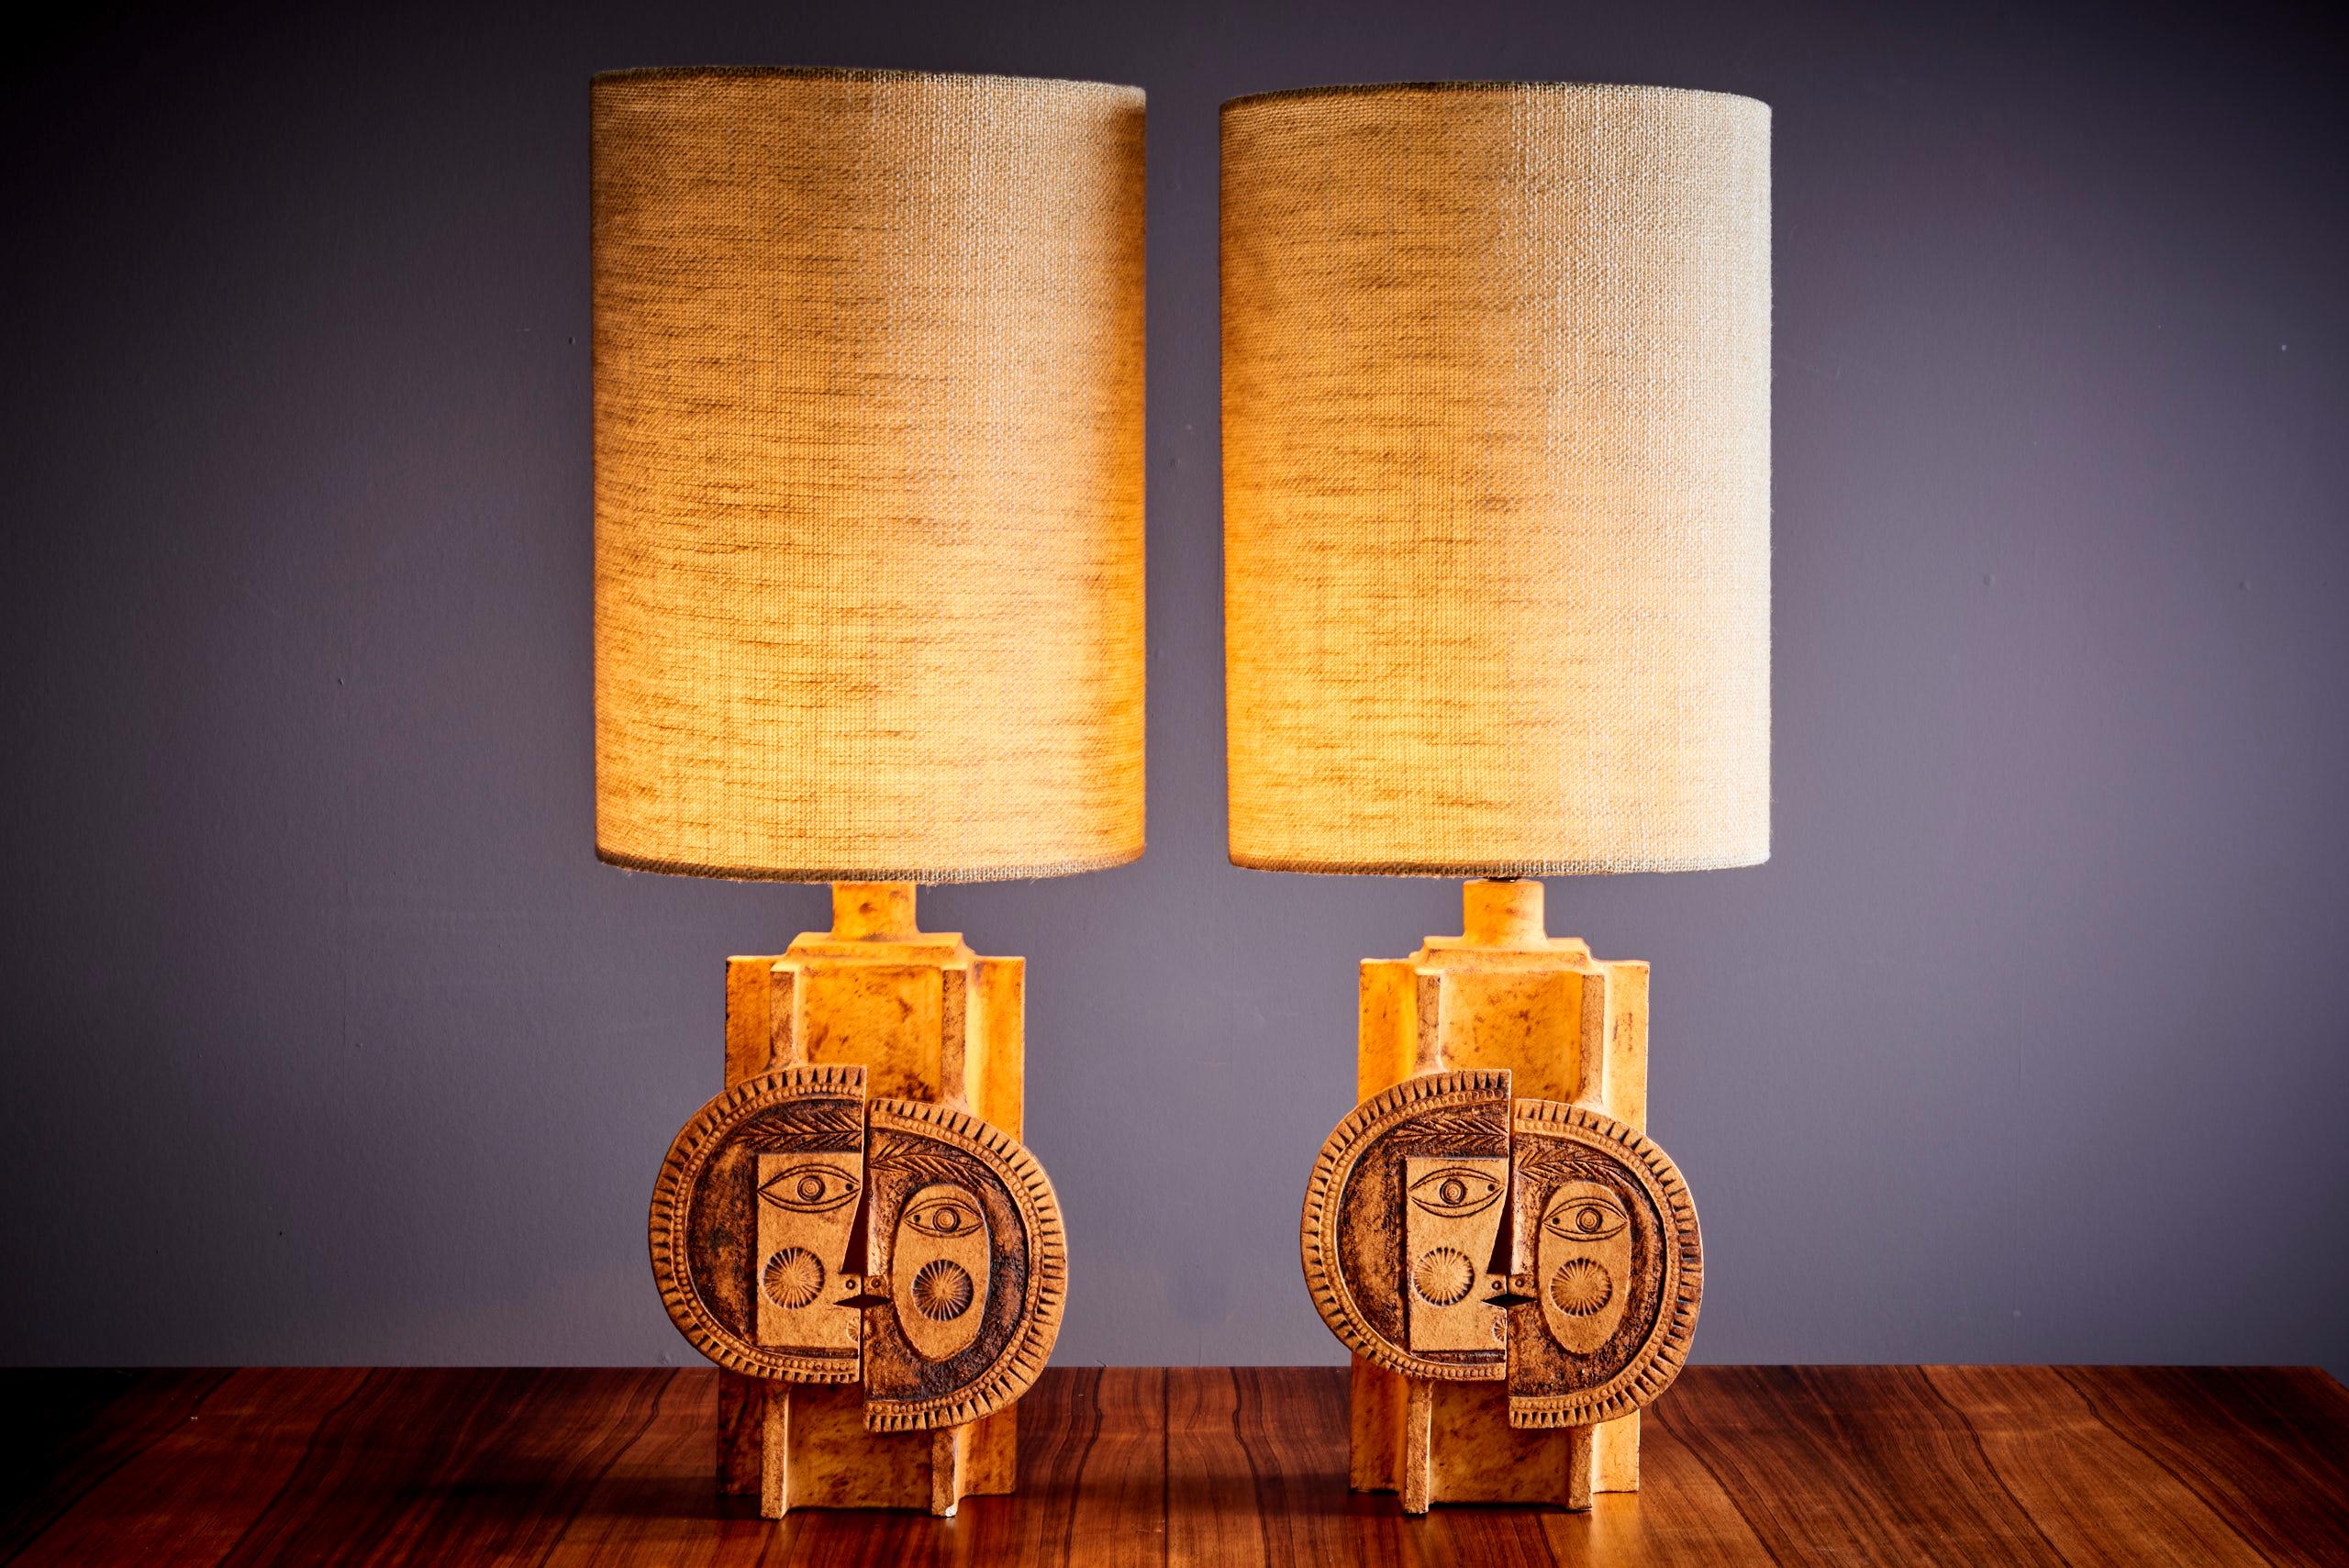 signed Roger Capron & Jean Derval Pair of Iconic Ceramic table lamps. The depth and width given apply to the lampstand. 
Please note: Lamp should be fitted professionally in accordance to local requirements.